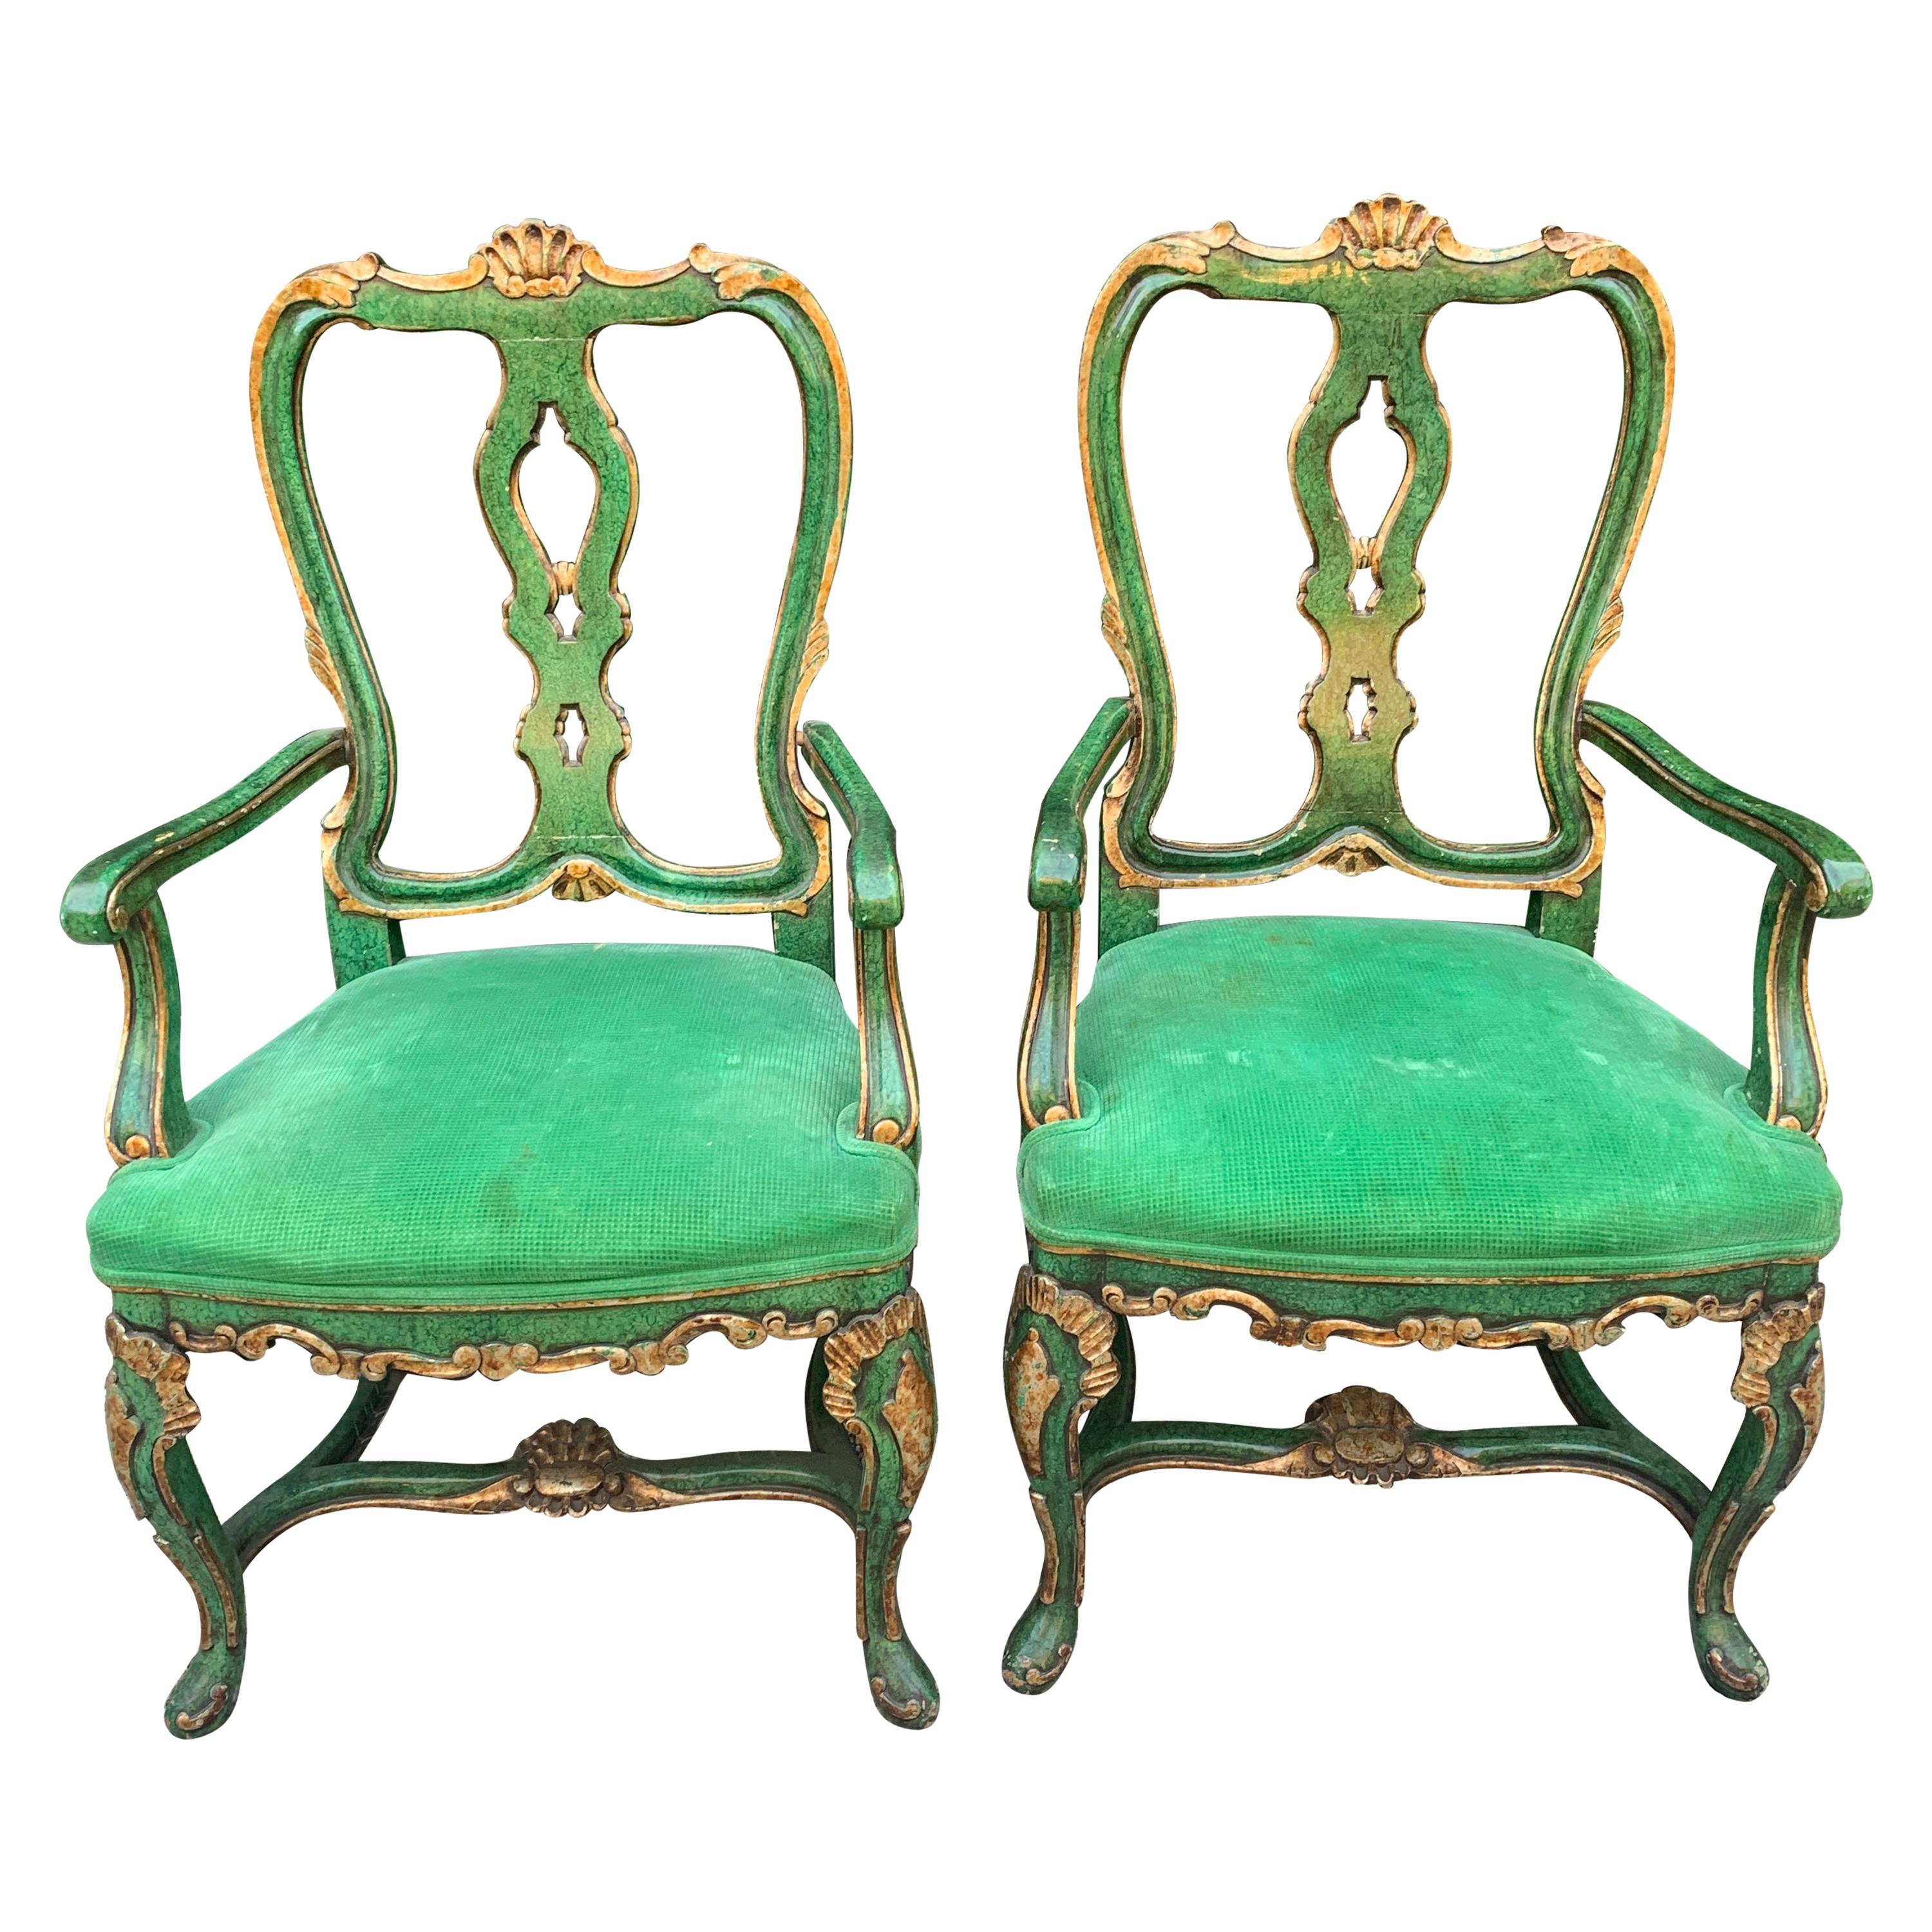 Pair of Faux Malachite and Gilt Armchairs